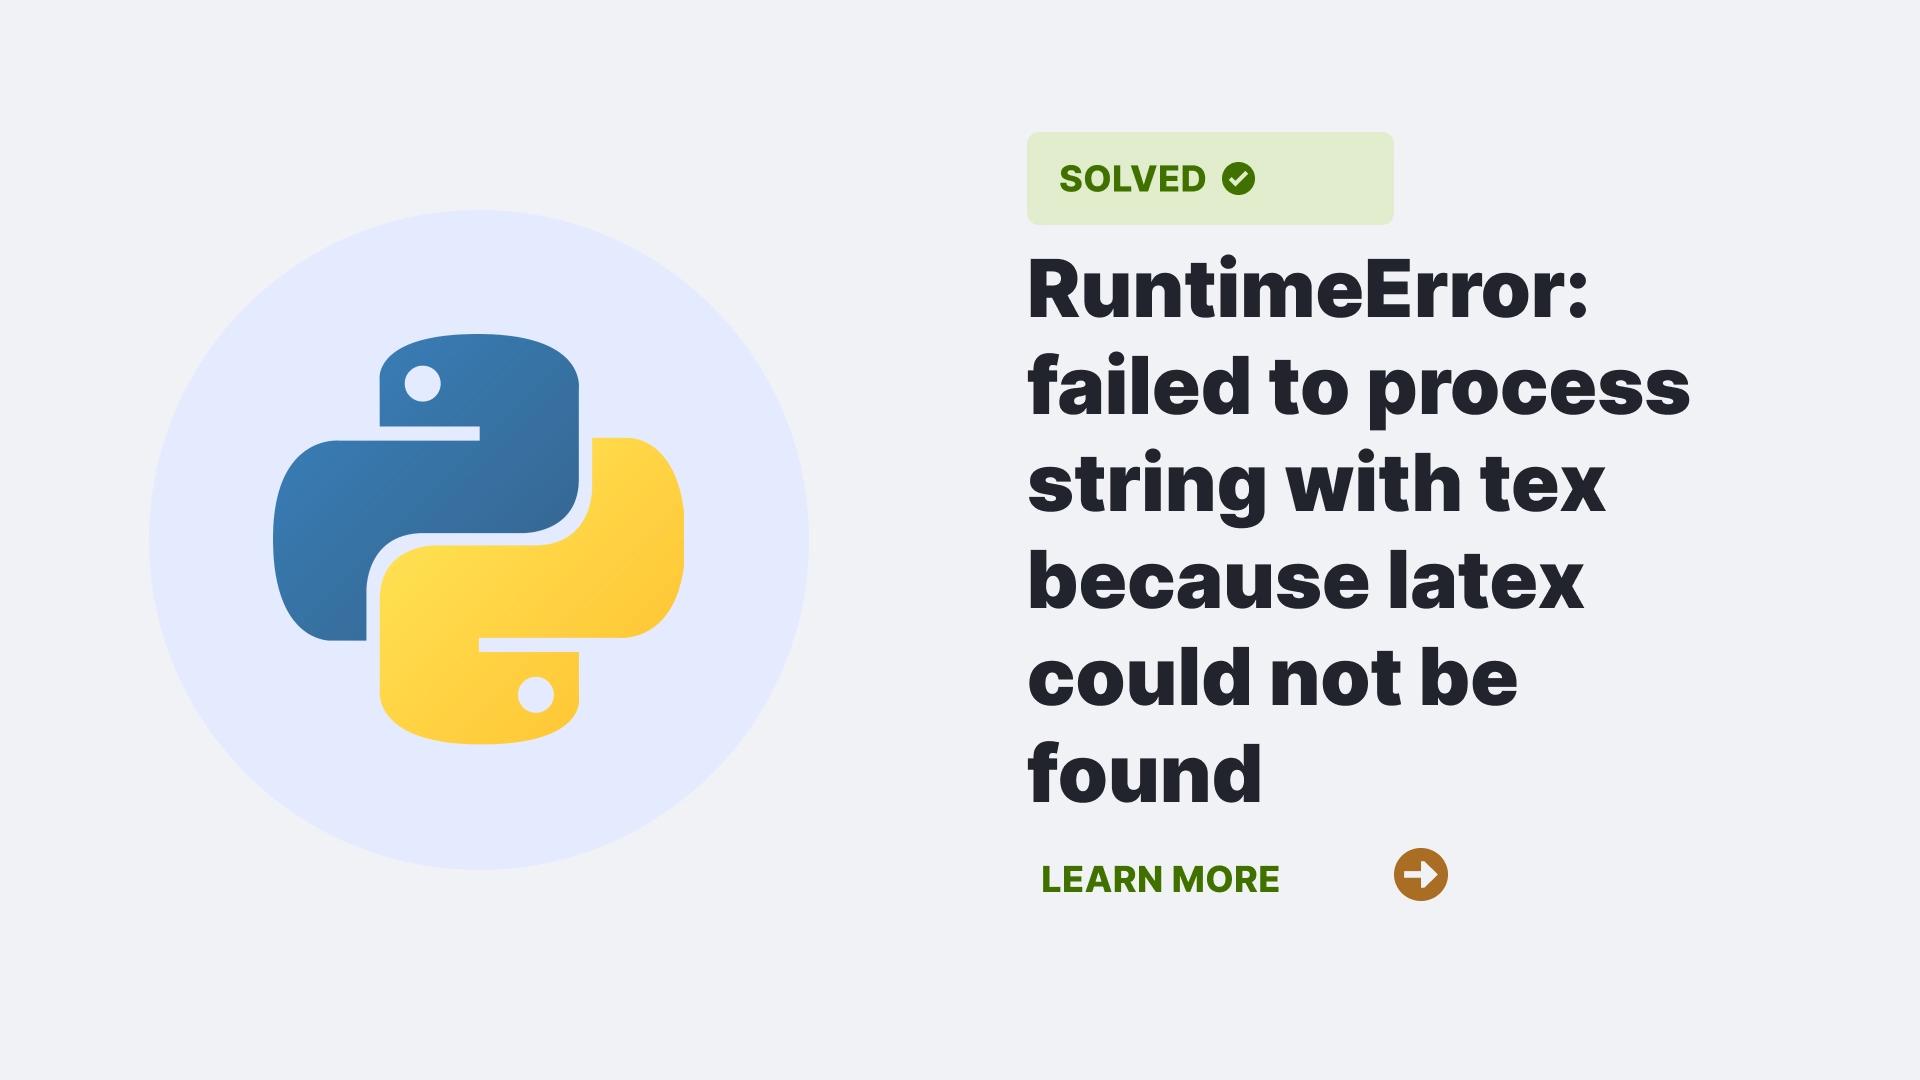 RuntimeError: failed to process string with tex because latex could not be found